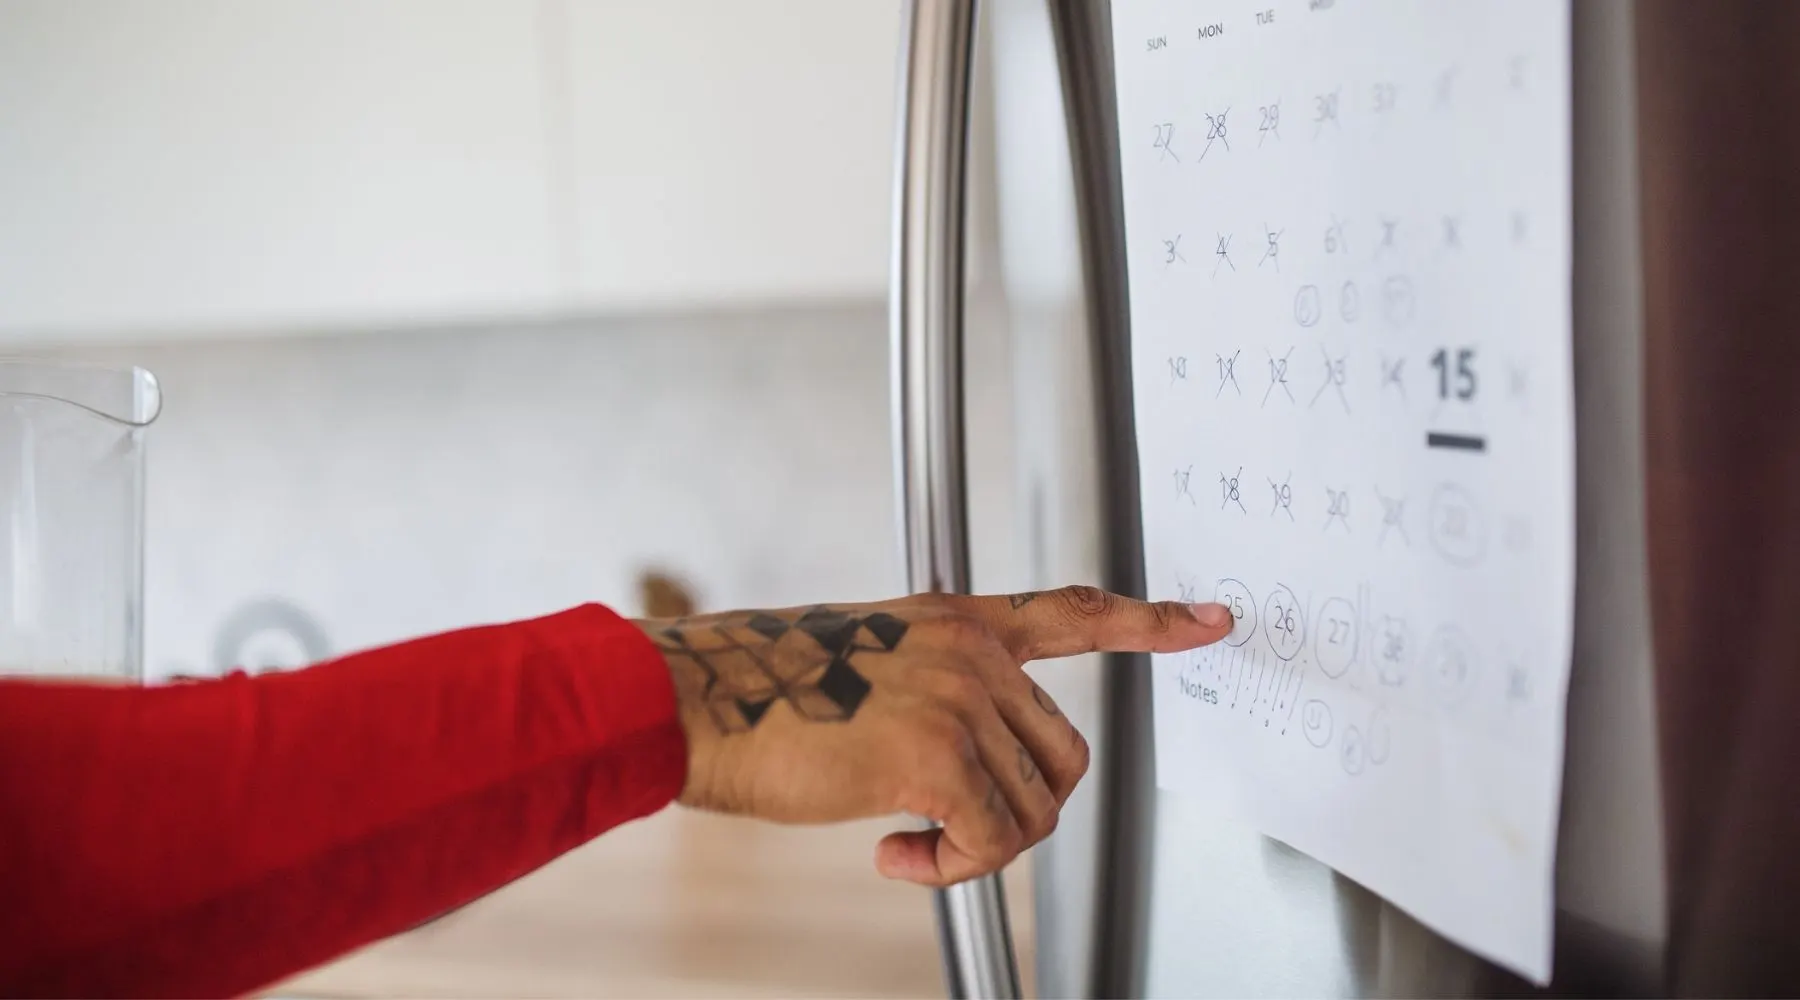 A man with a tattooed hand points at a calendar on the fridge.